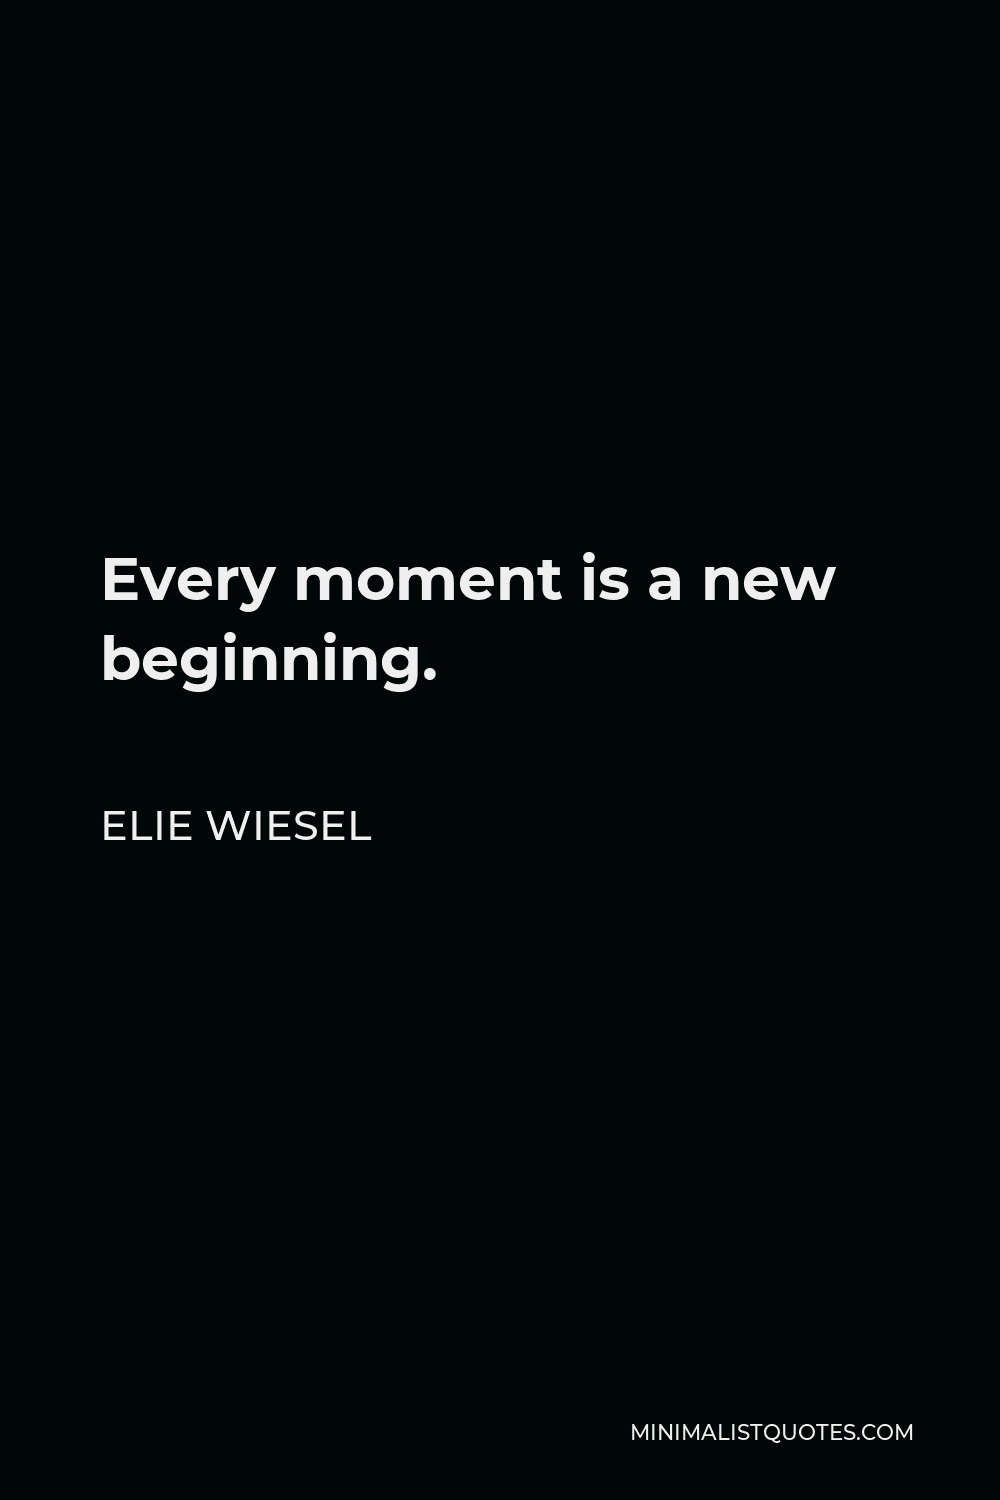 Elie Wiesel Quote - Every moment is a new beginning.